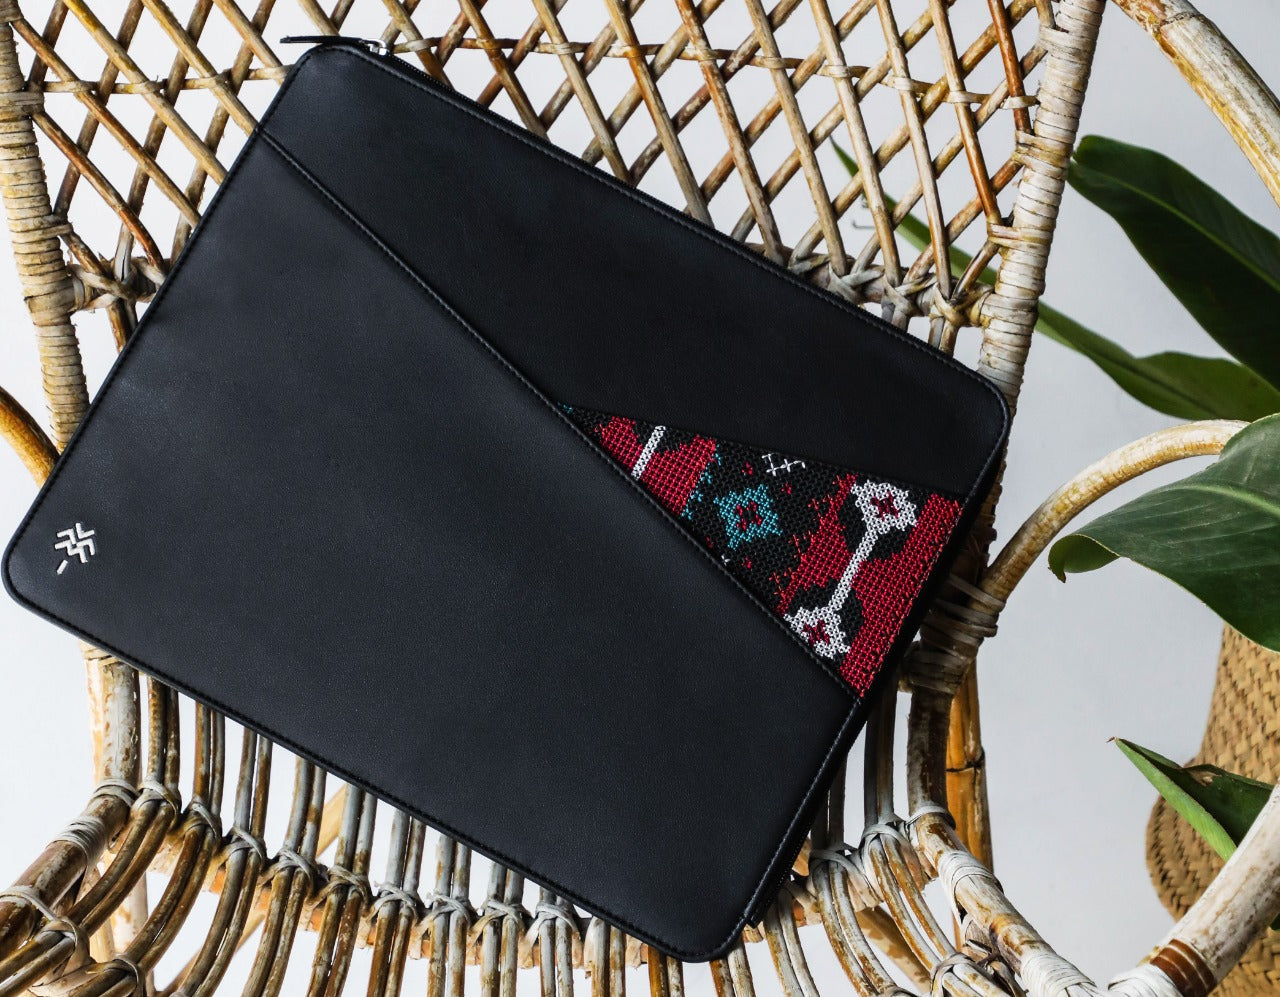 Mexico Embroidered Laptop Sleeve Black